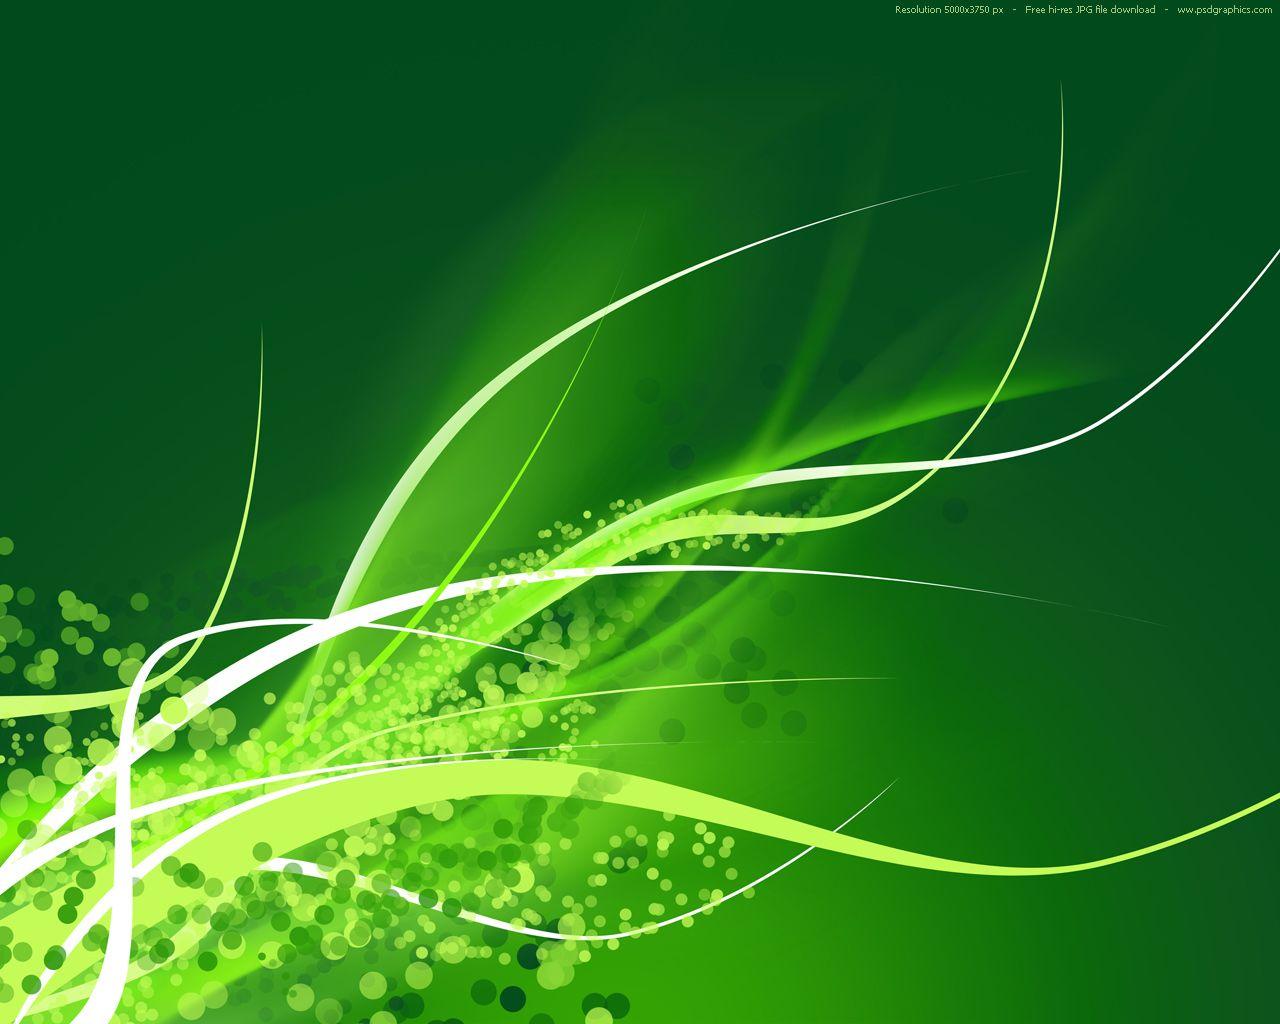 Abstract Artwork Background Psdgraphics Cool Green Website Designs